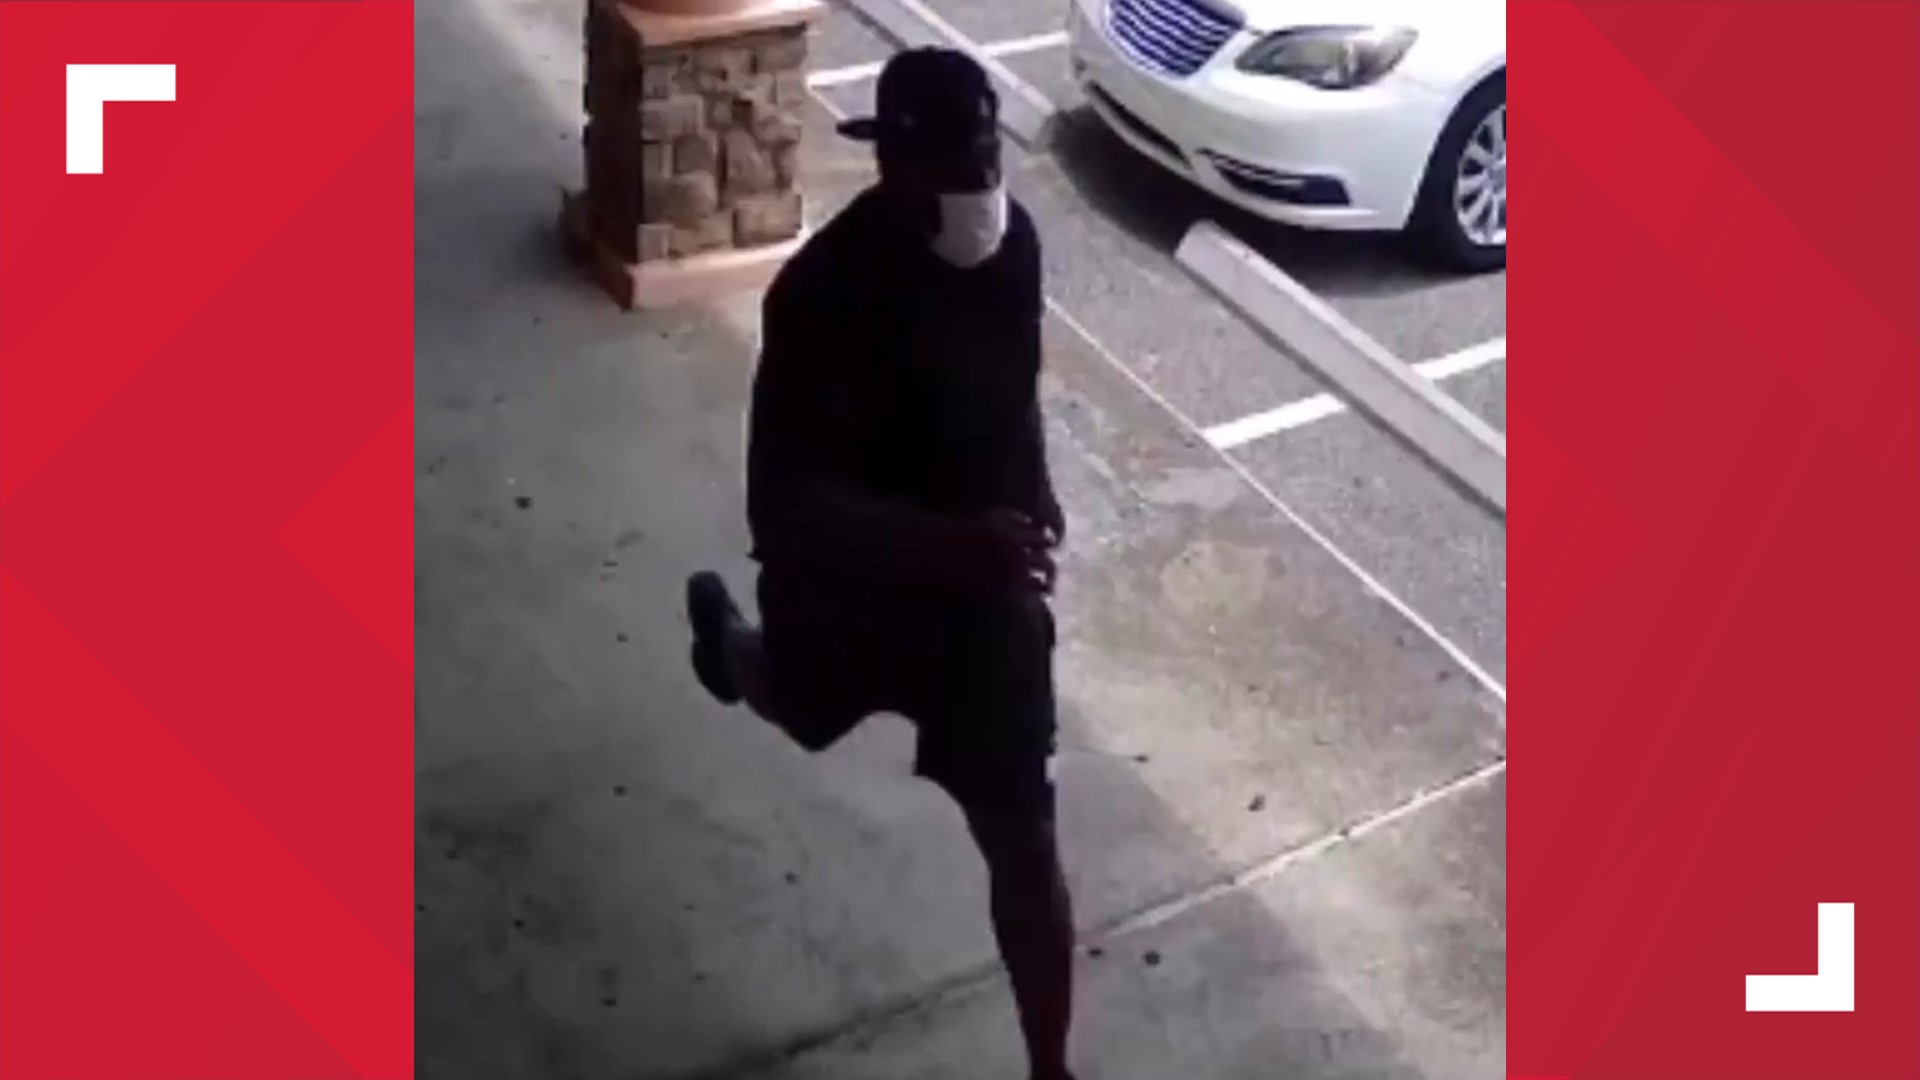 Houston police released surveillance video of a robbery where the suspects targeted a pastor outside of his church in the 11200 block of Beechnut.